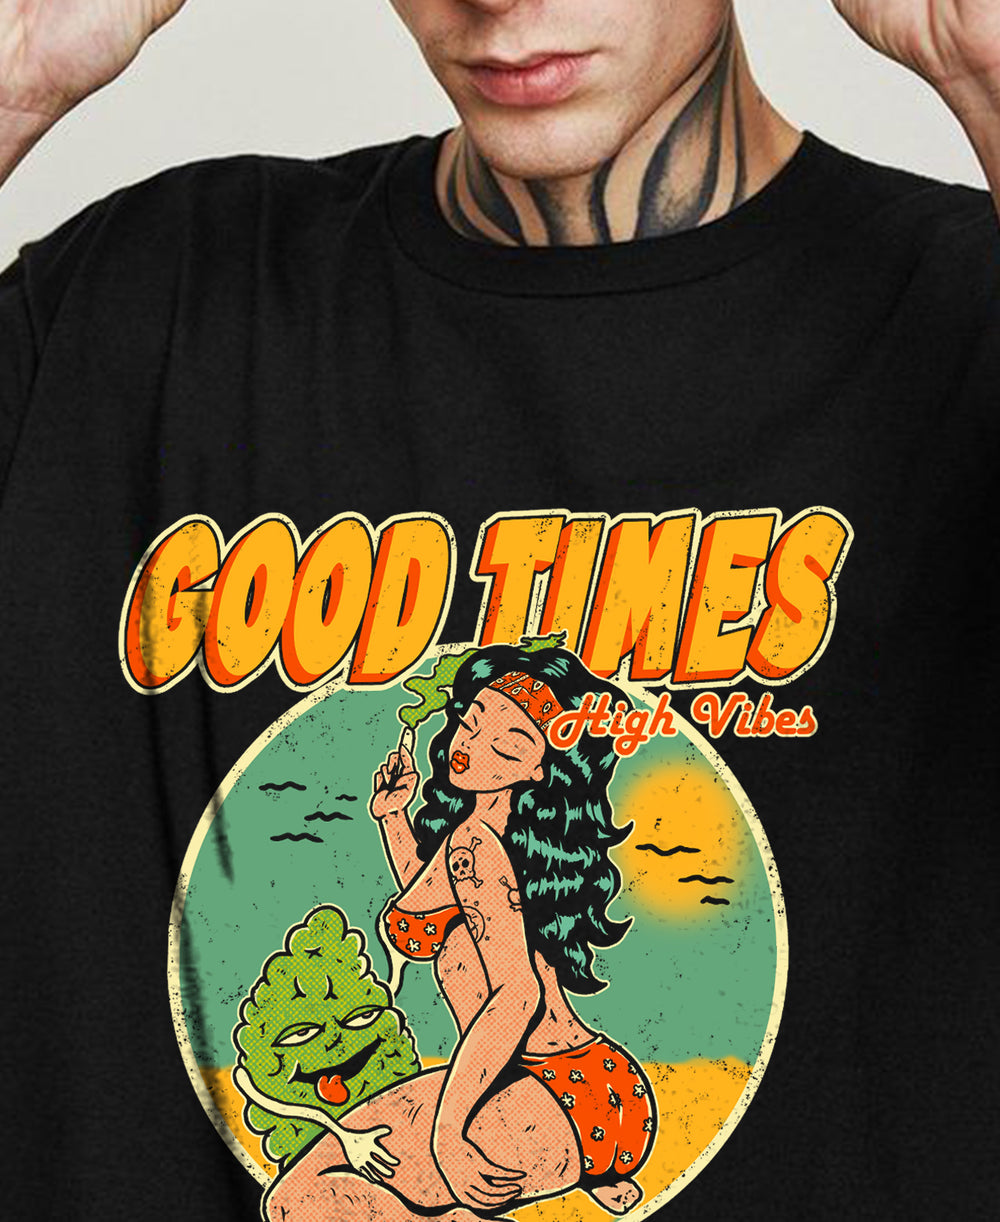 Good Times High Vibes Unisex Shirt, Vintage Pin Up Girl Smoking Weed Sea Side Funny Unisex T-shirt Model